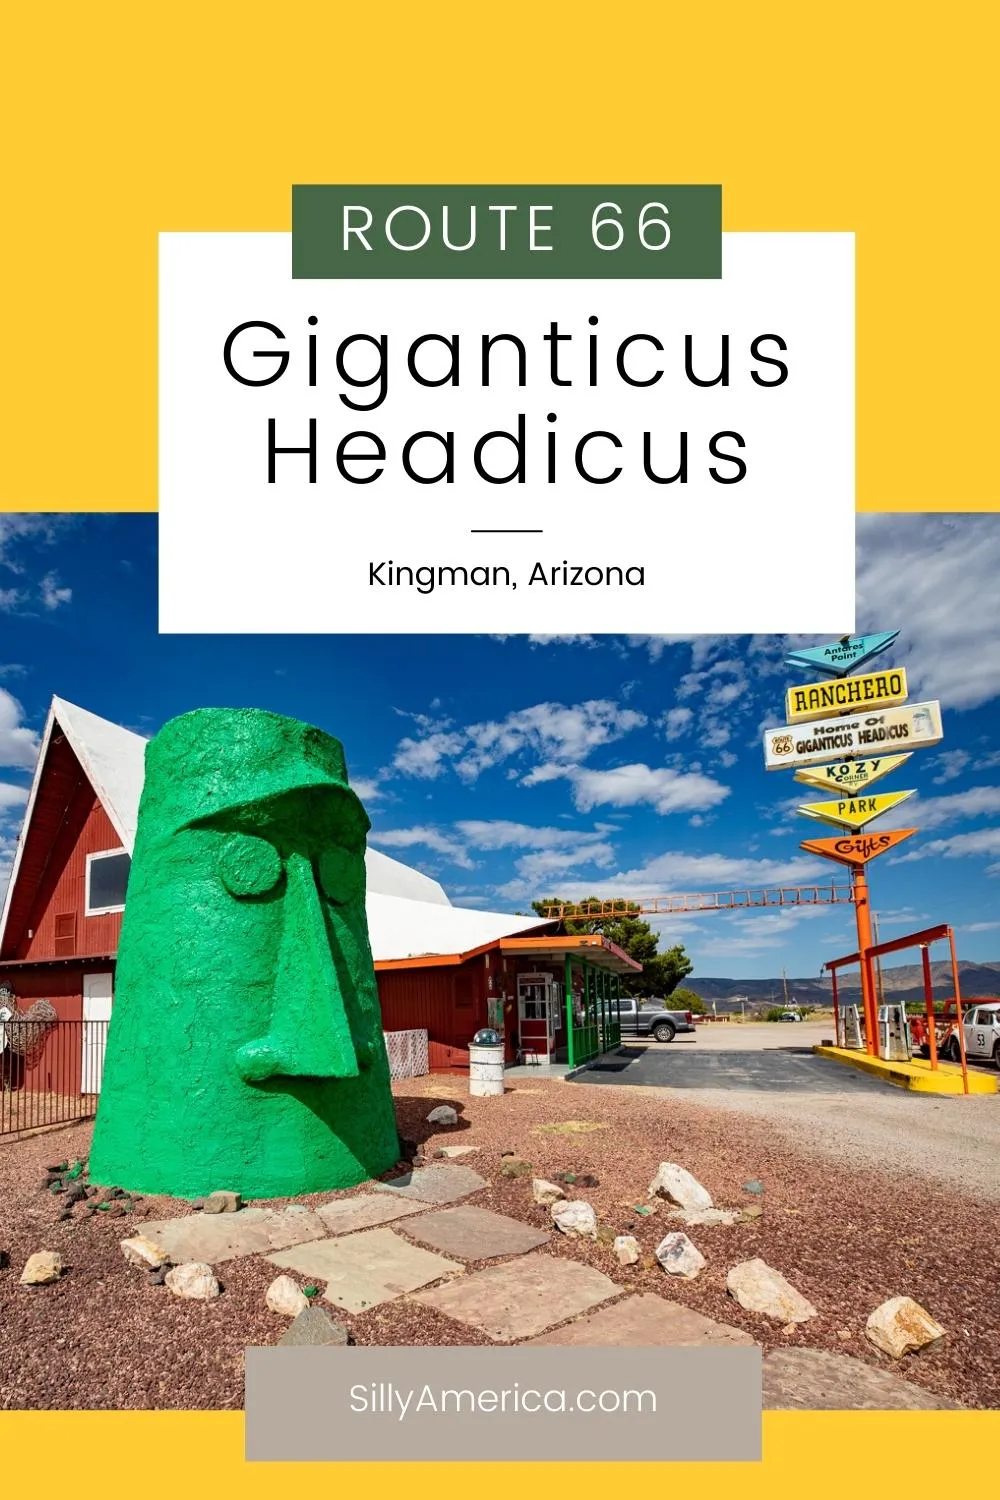 Even the best road trips can come to a head. And this one is a big one! Meet Giganticus Headicus in Kingman, Arizona: the big green head on Route 66! Visit this weird roadside attraction on a Route 66 road trip through Arizona! It's a fun stop to add to your road trip travel itinerary. #RoadTrip #RoadTrips #Arizona #ArizonaRoadTrip #RoadsideAttraction #RoadsideAttractions #RoadsideAmerica #route66 #Route66RoadTrip